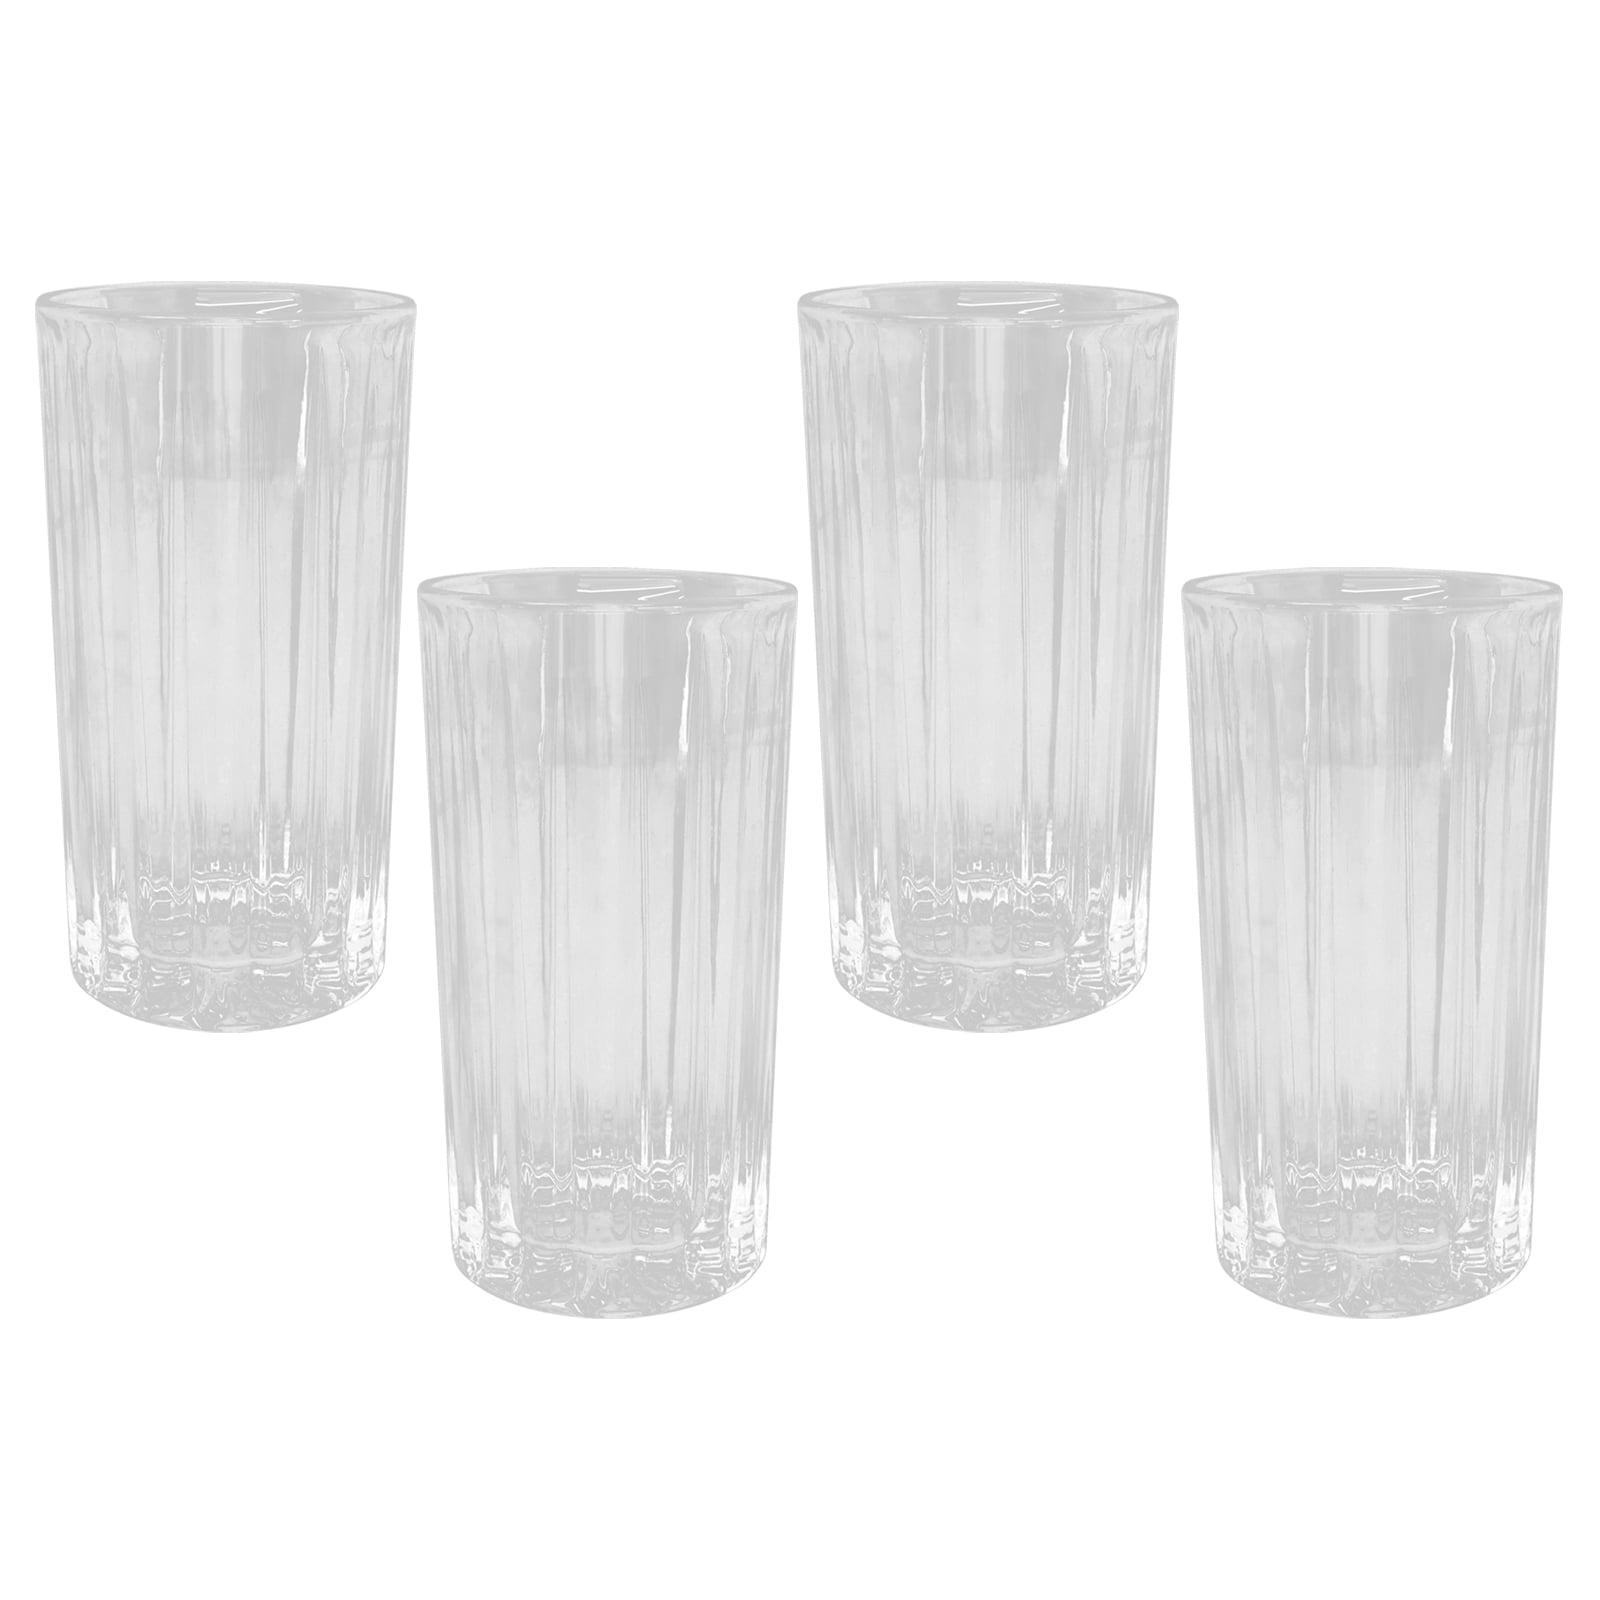 Set Of 4 Clear Highball Drinking Glasses Kitchen Glassware Perfect For Party Gin And Tonic 1482